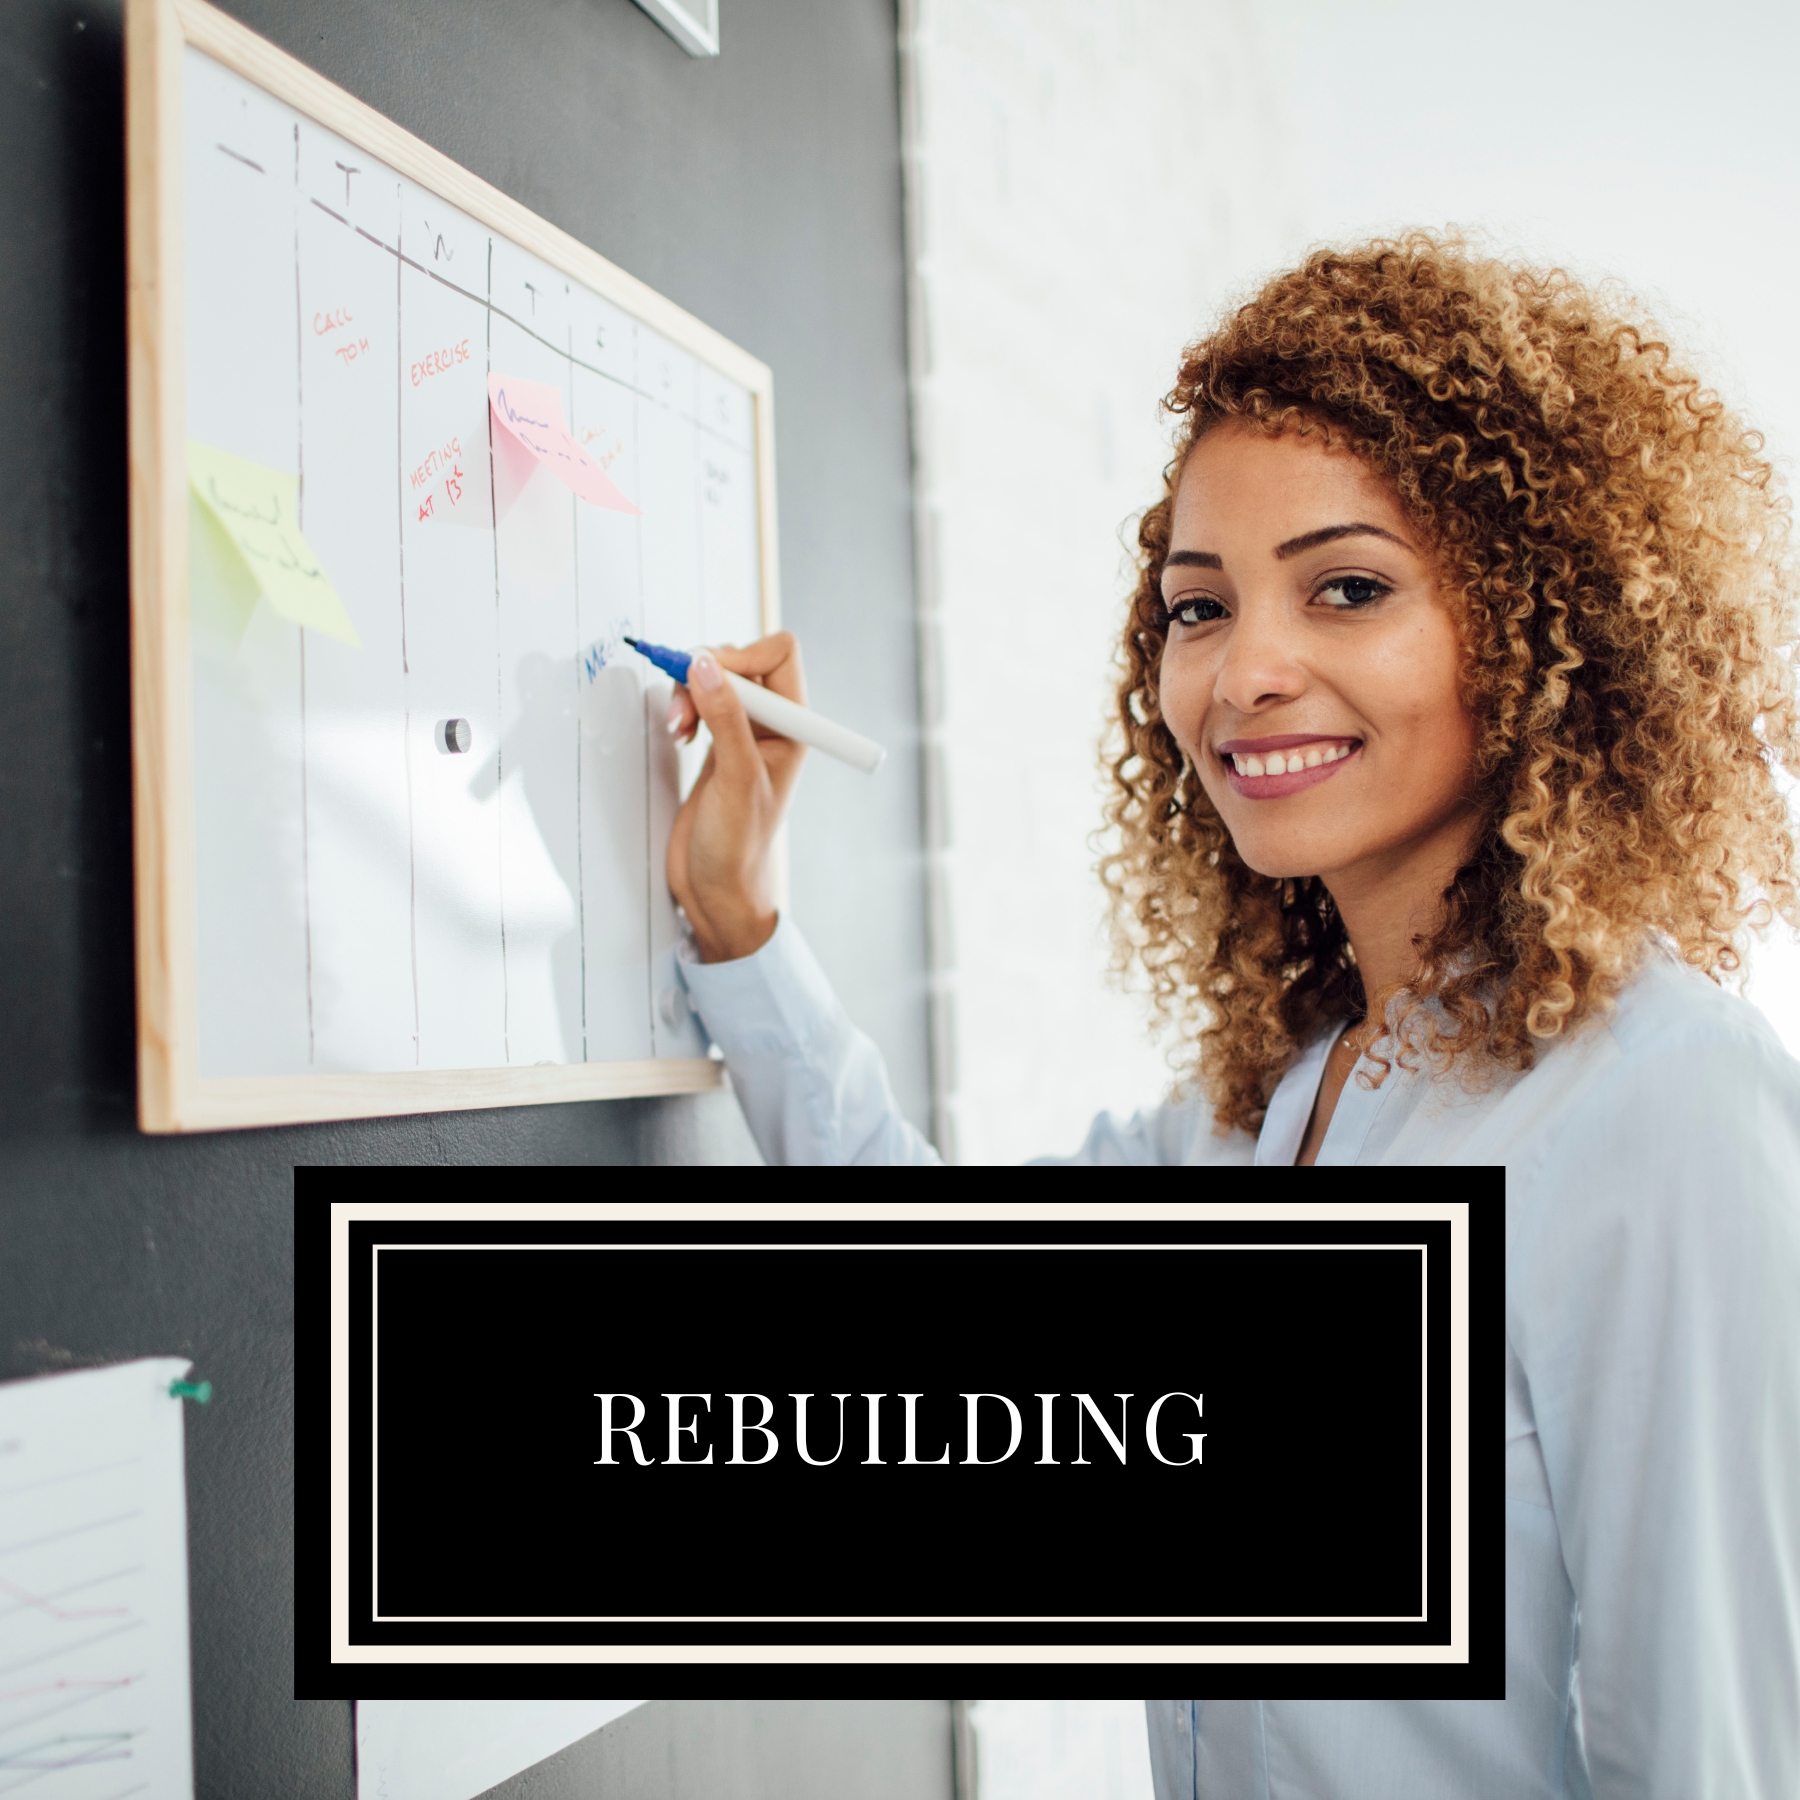 How can I rebuild my business with Mogul Chix?